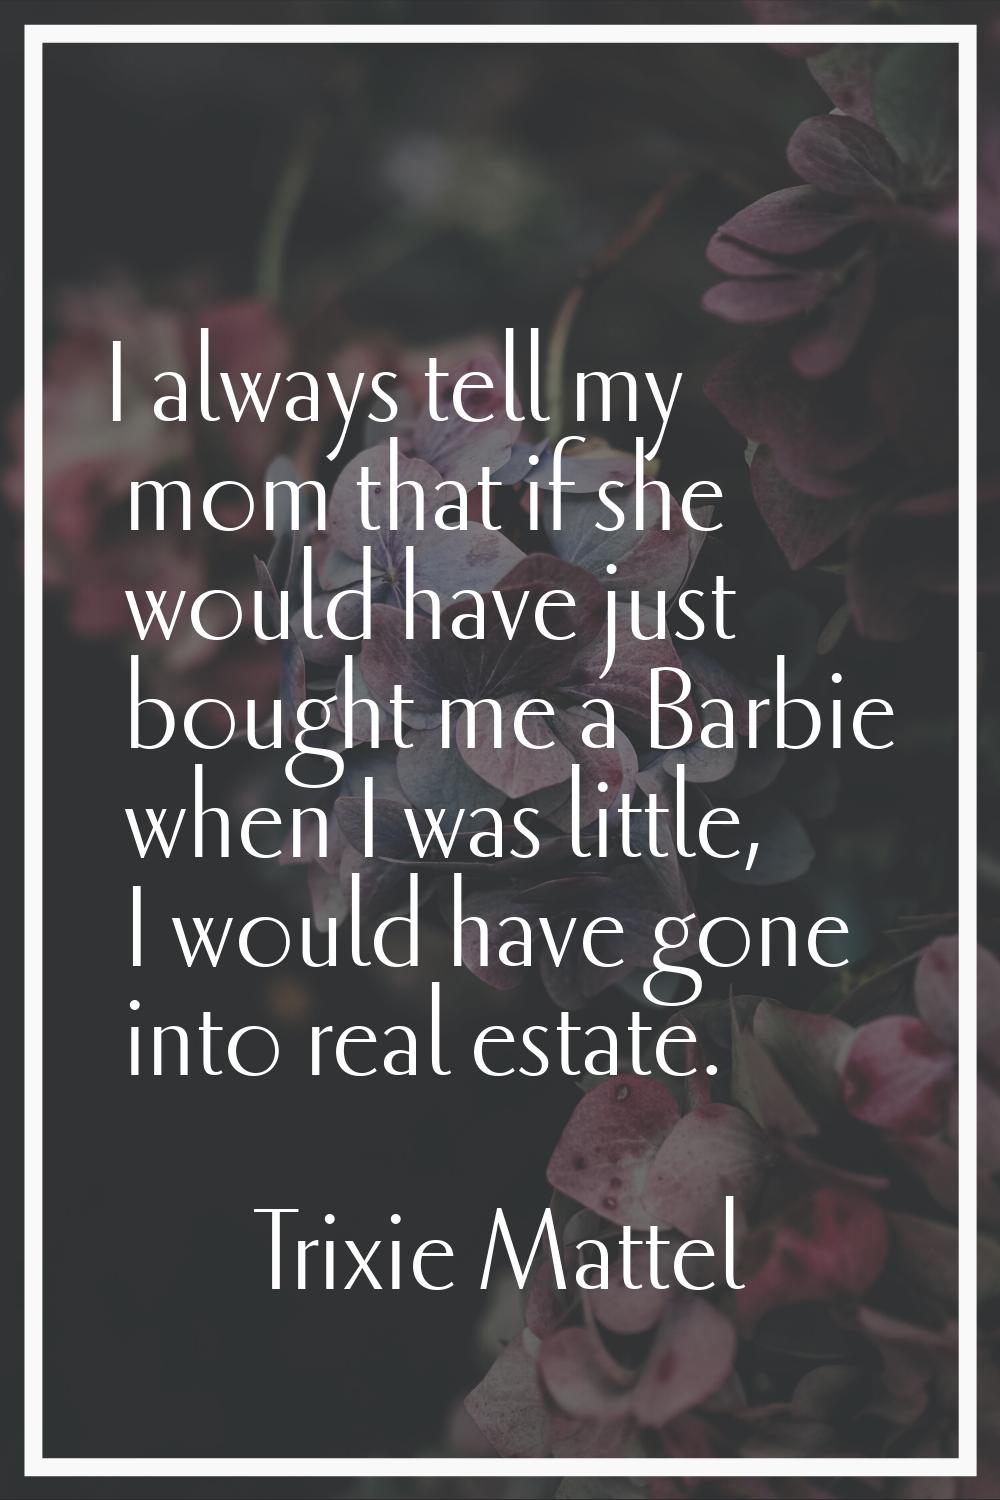 I always tell my mom that if she would have just bought me a Barbie when I was little, I would have